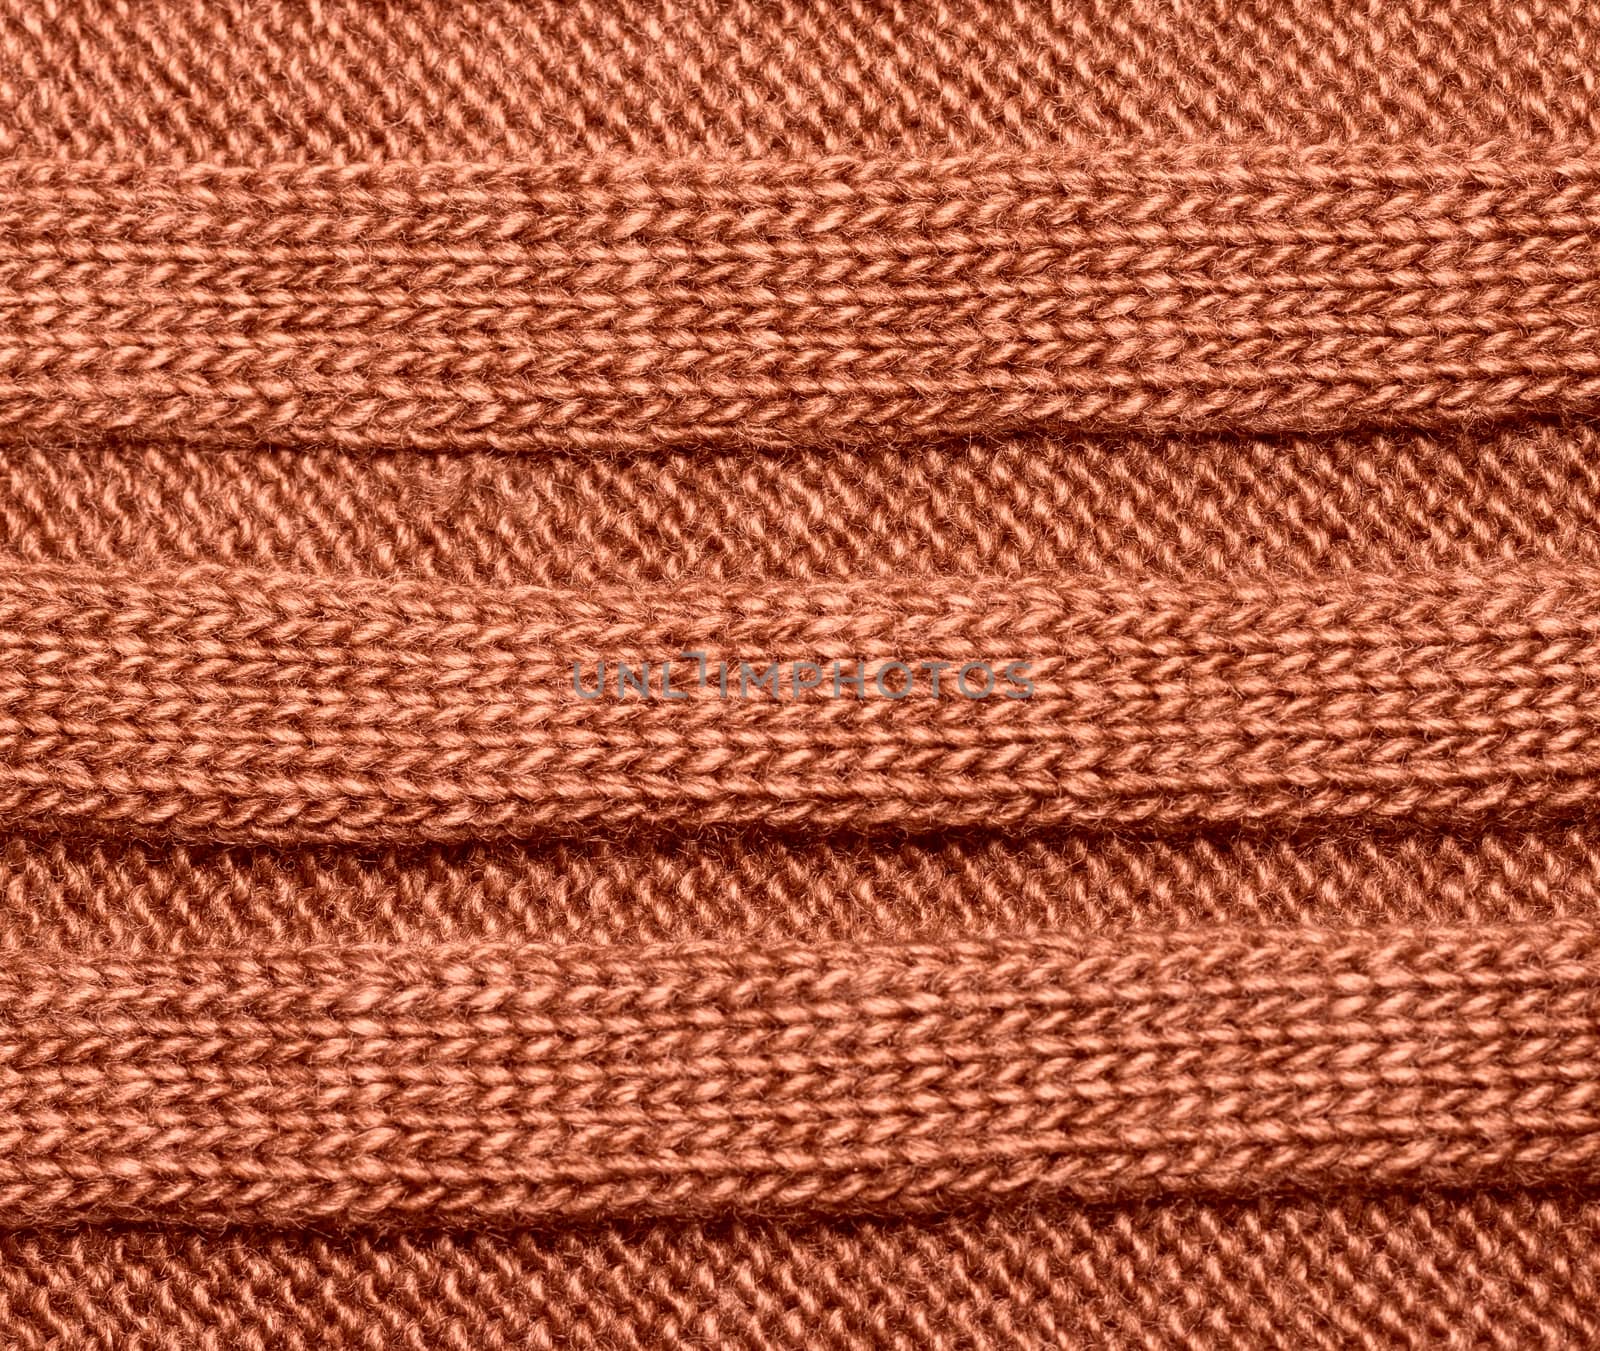 Brown ribbed knit wool like texture, textured fabrics knitted jersey, wool as a background pattern, upholstery